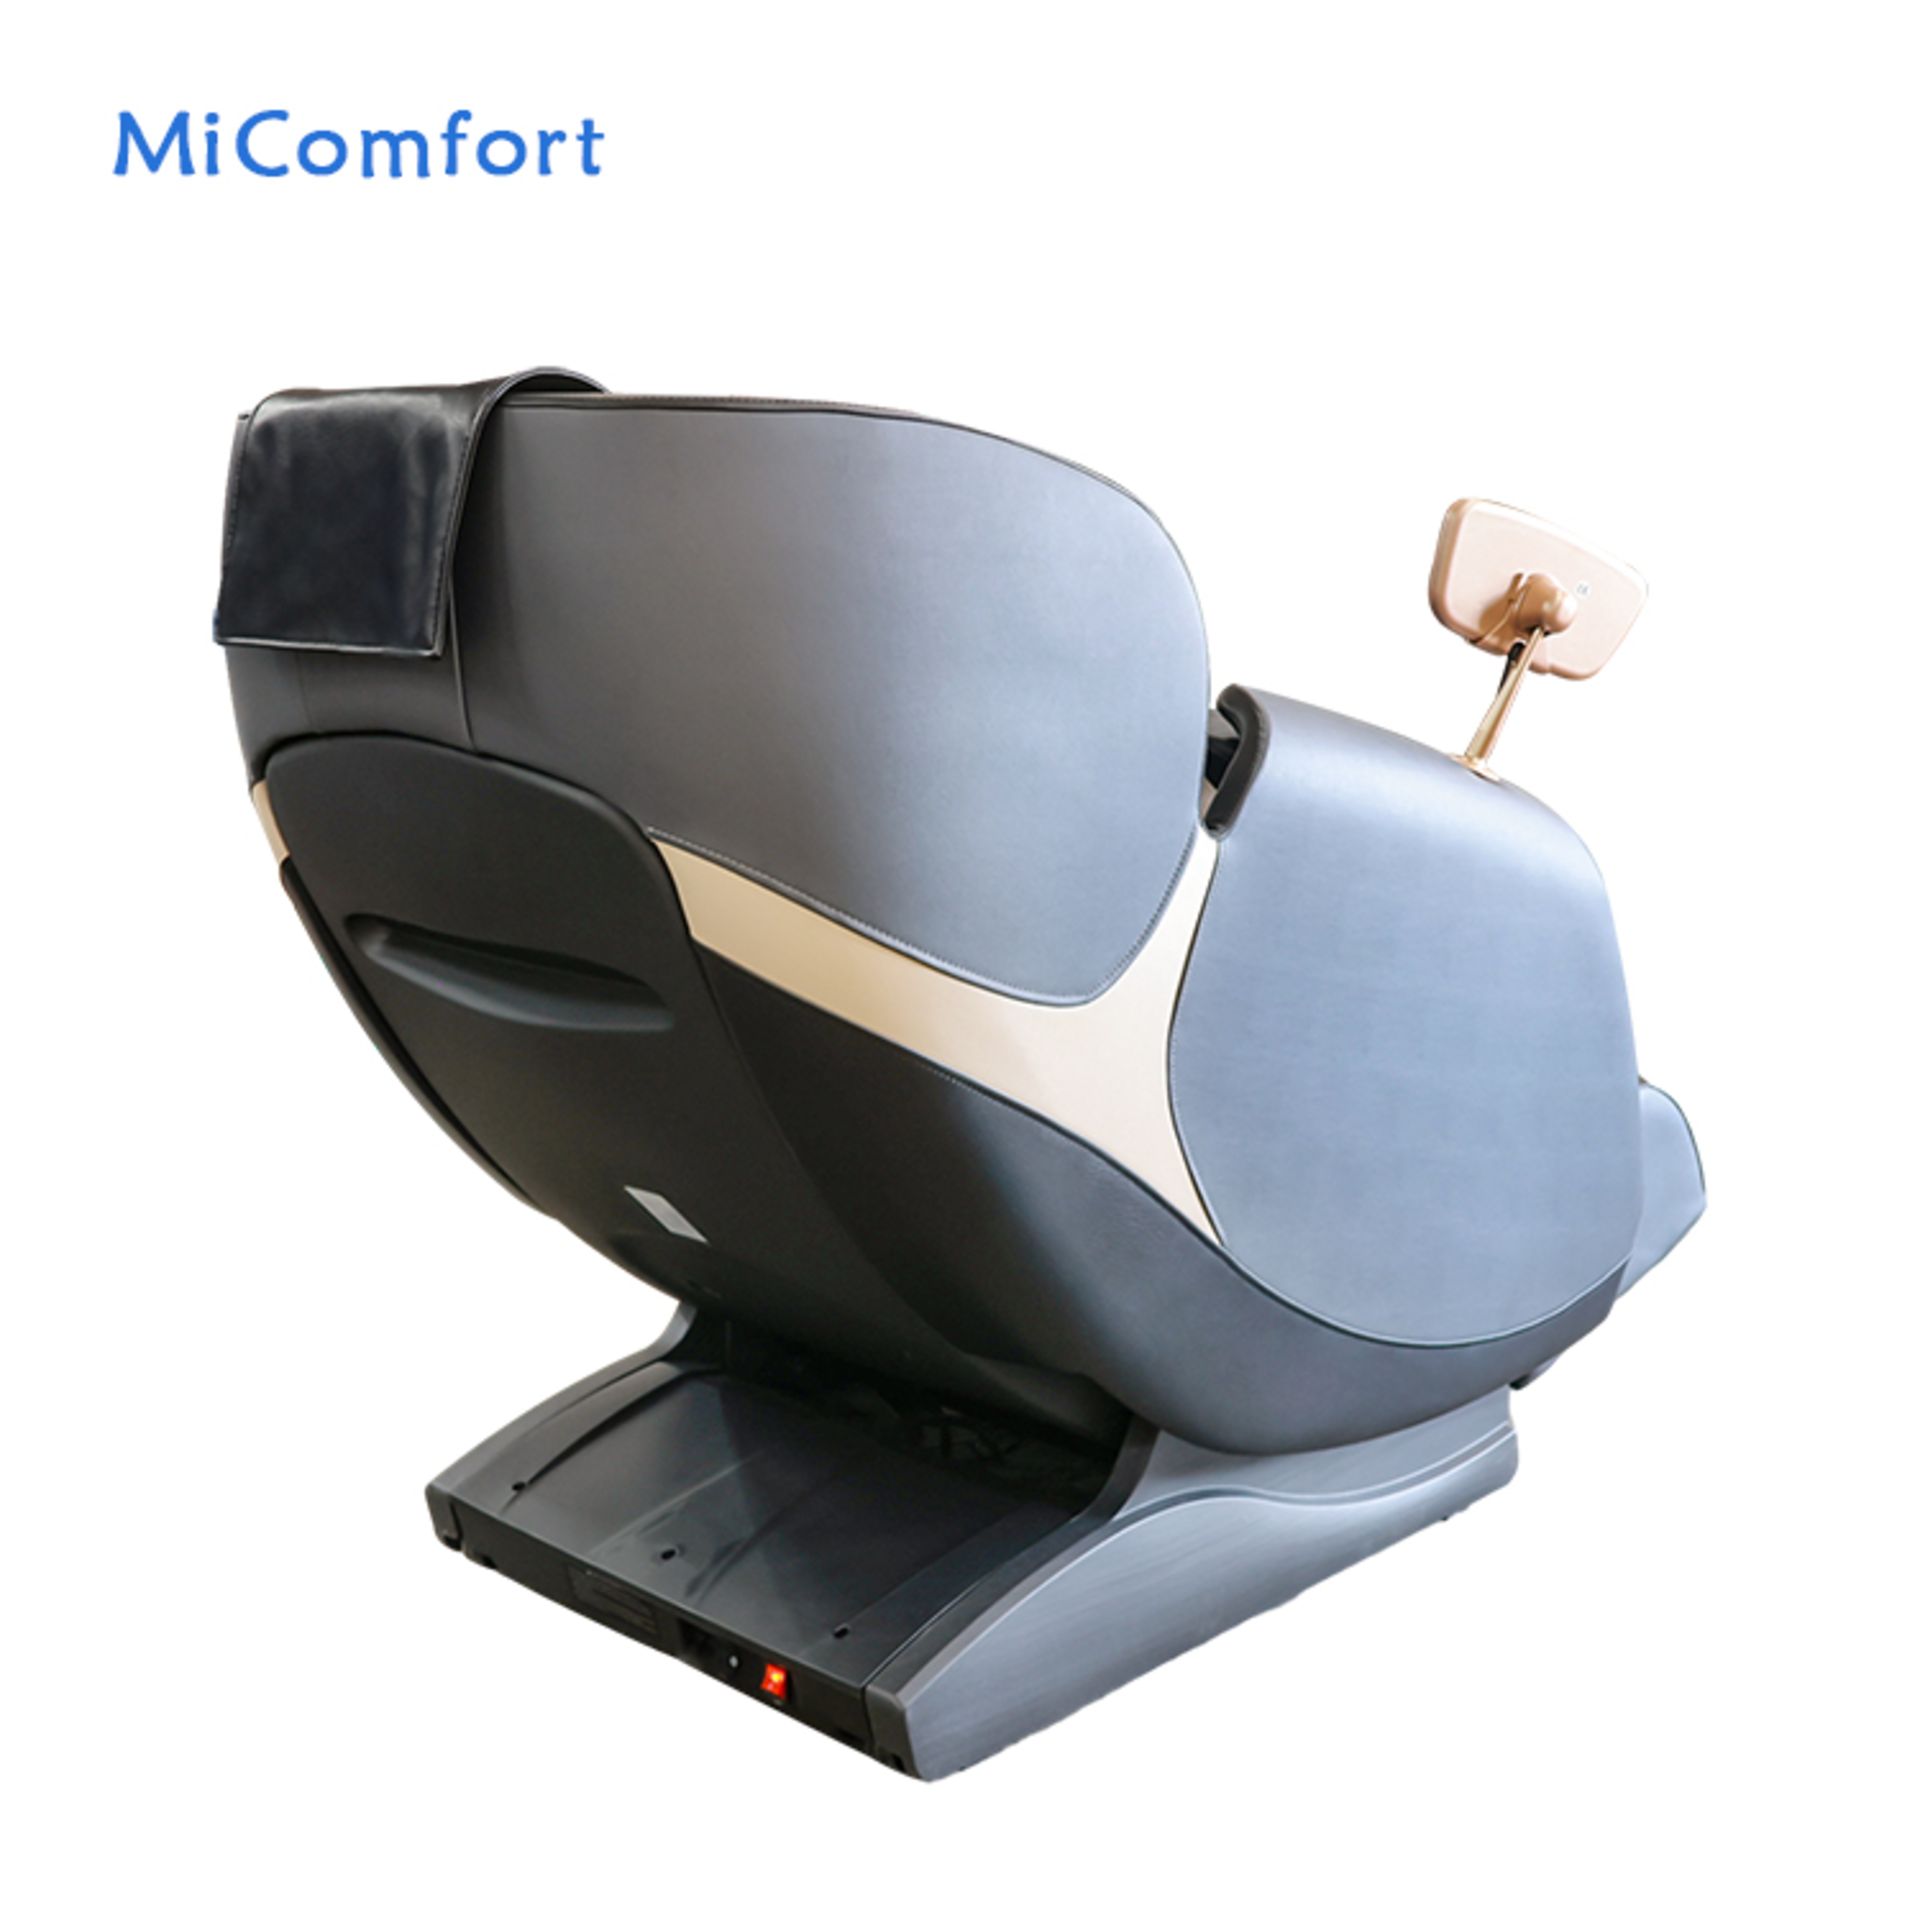 Brand New in Box Orchid Blue/Black MiComfort Full Body Massage Chair RRP £2199 *NO VAT* - Image 5 of 13